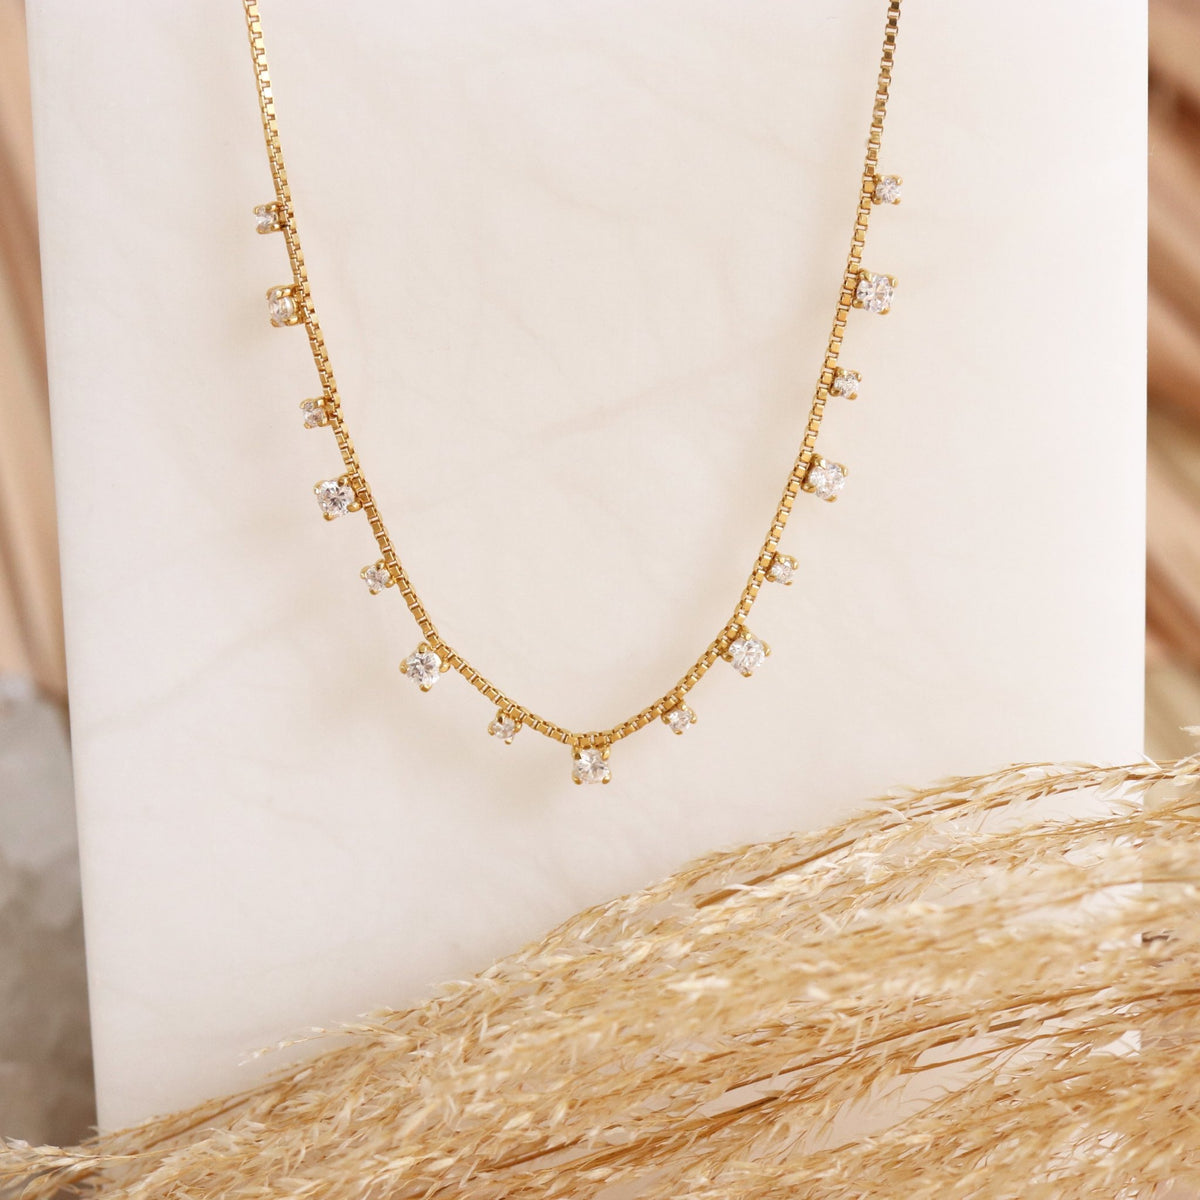 SCATTERED LOVE COLLAR NECKLACE - CUBIC ZIRCONIA &amp; GOLD - SO PRETTY CARA COTTER